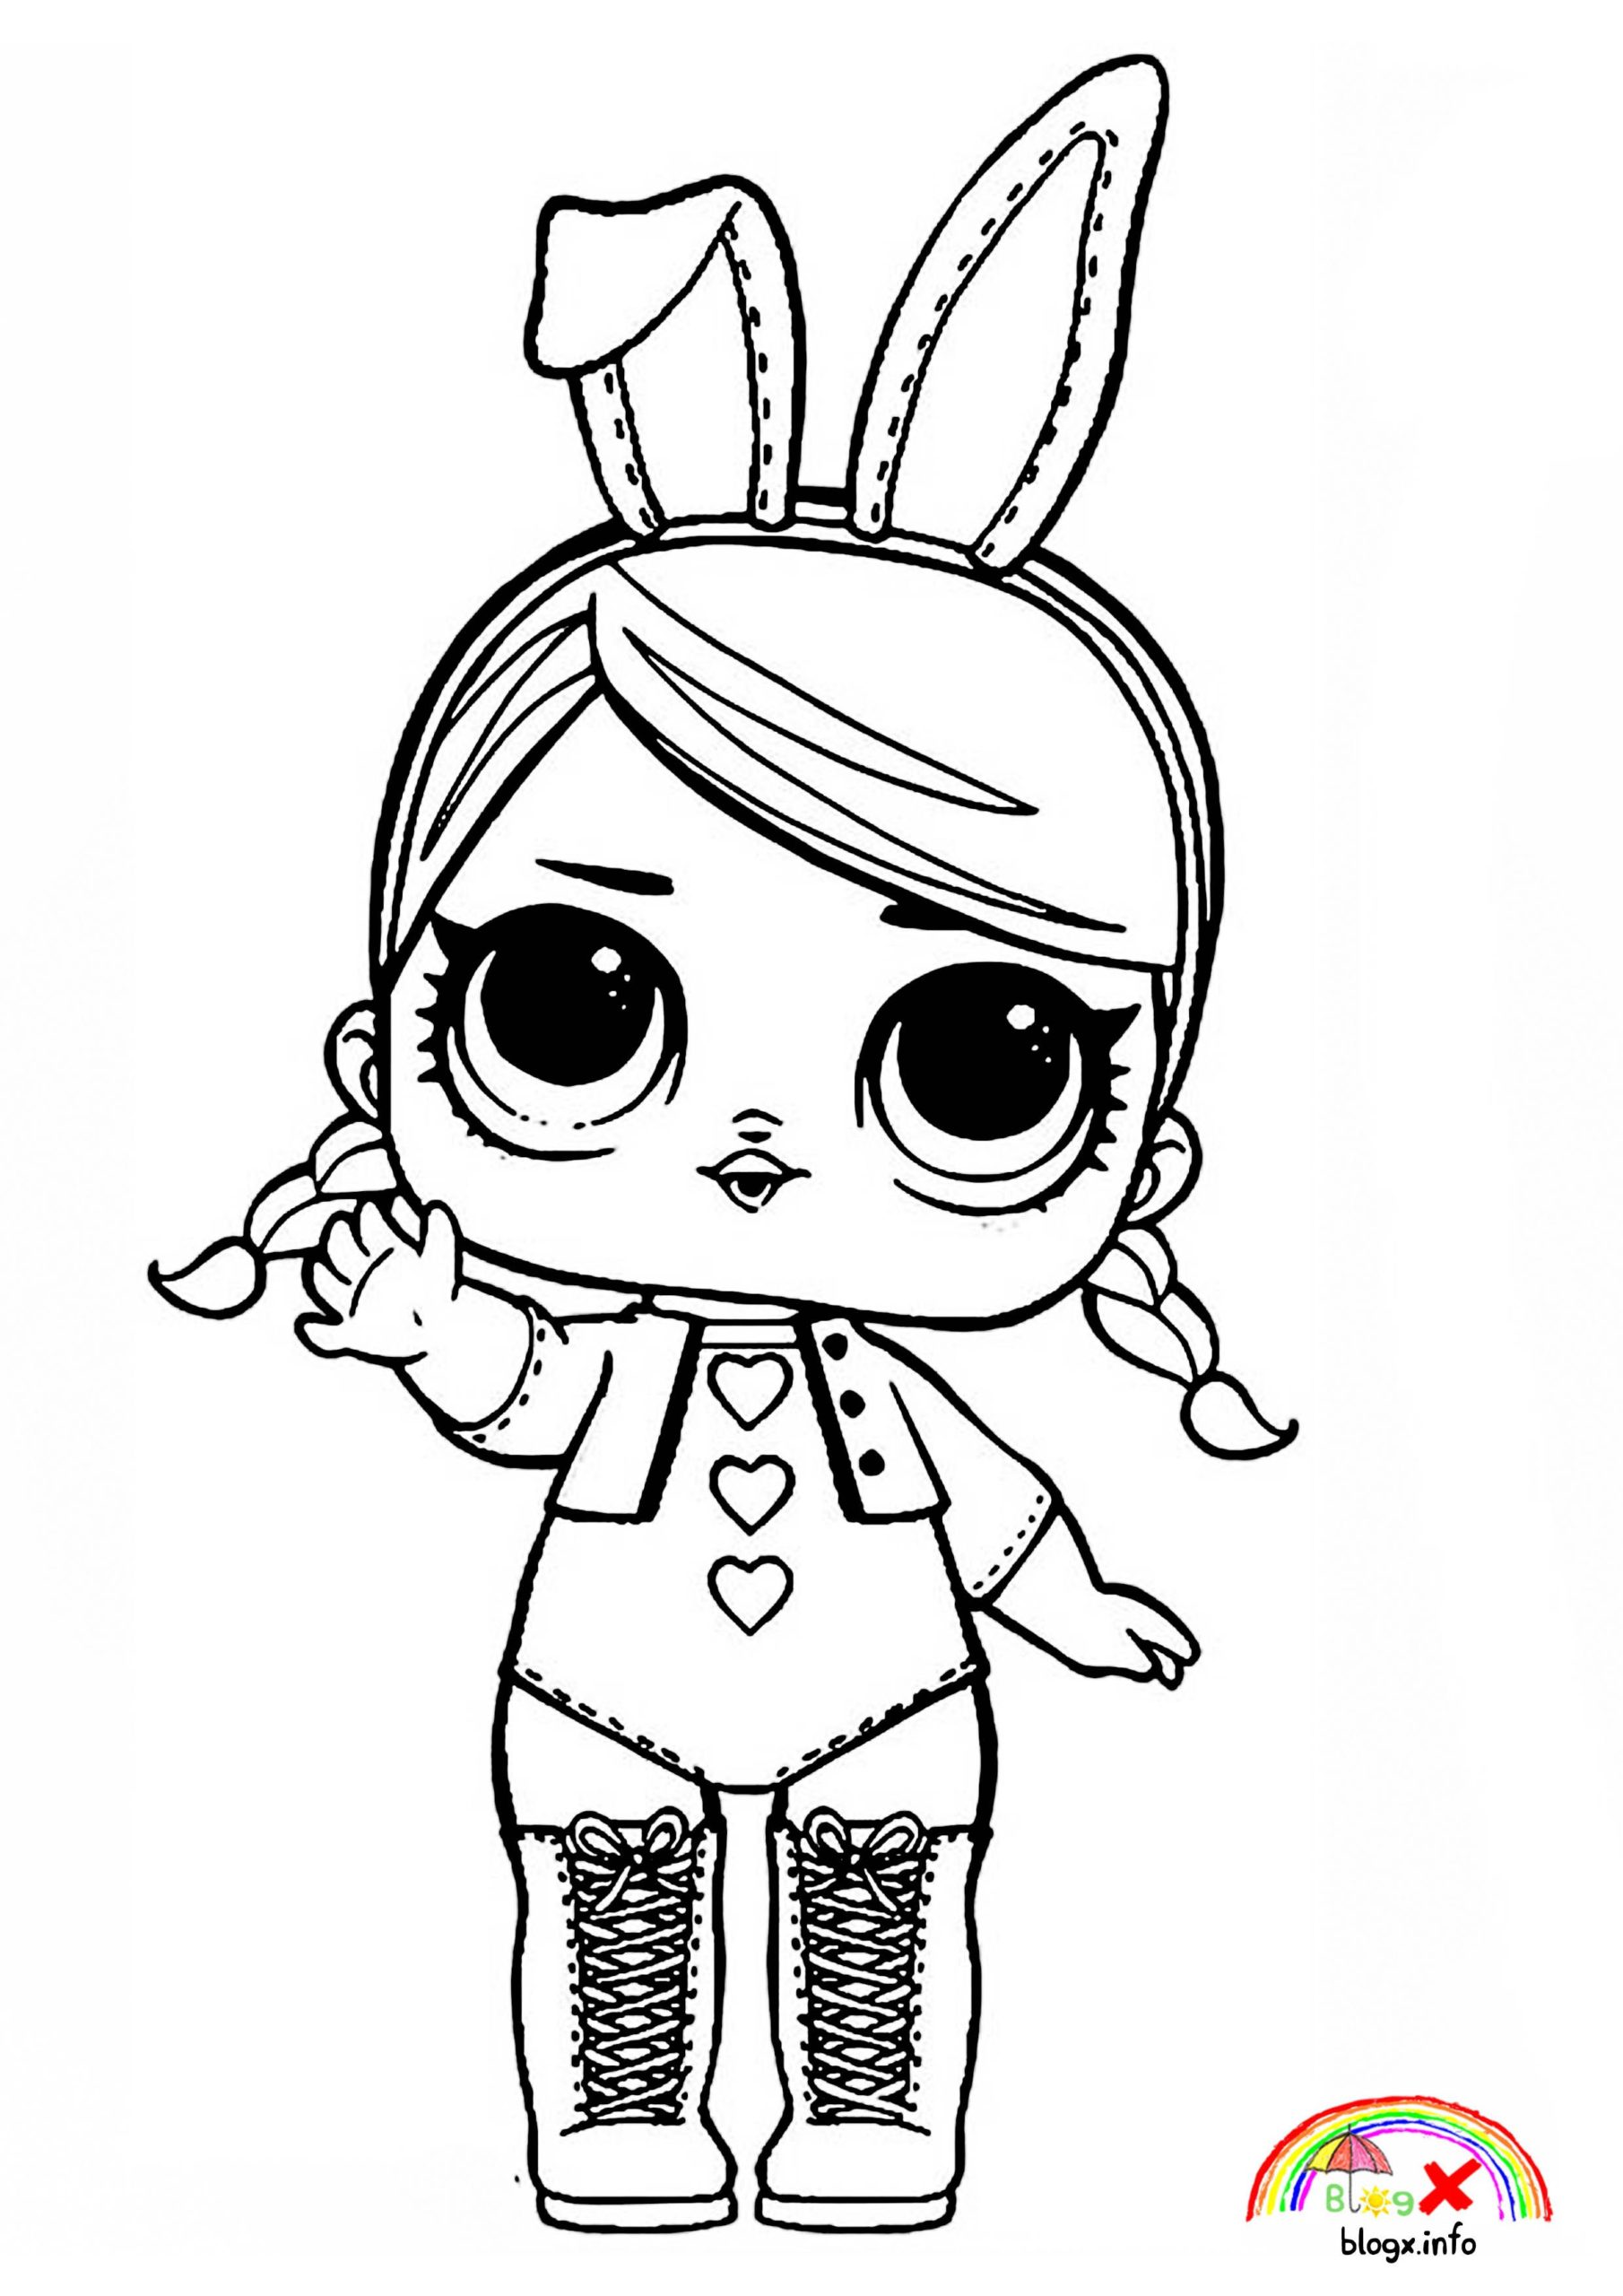 coloring dolls lol omg bunny surprise colouring costume colorful drawings popular blogx info